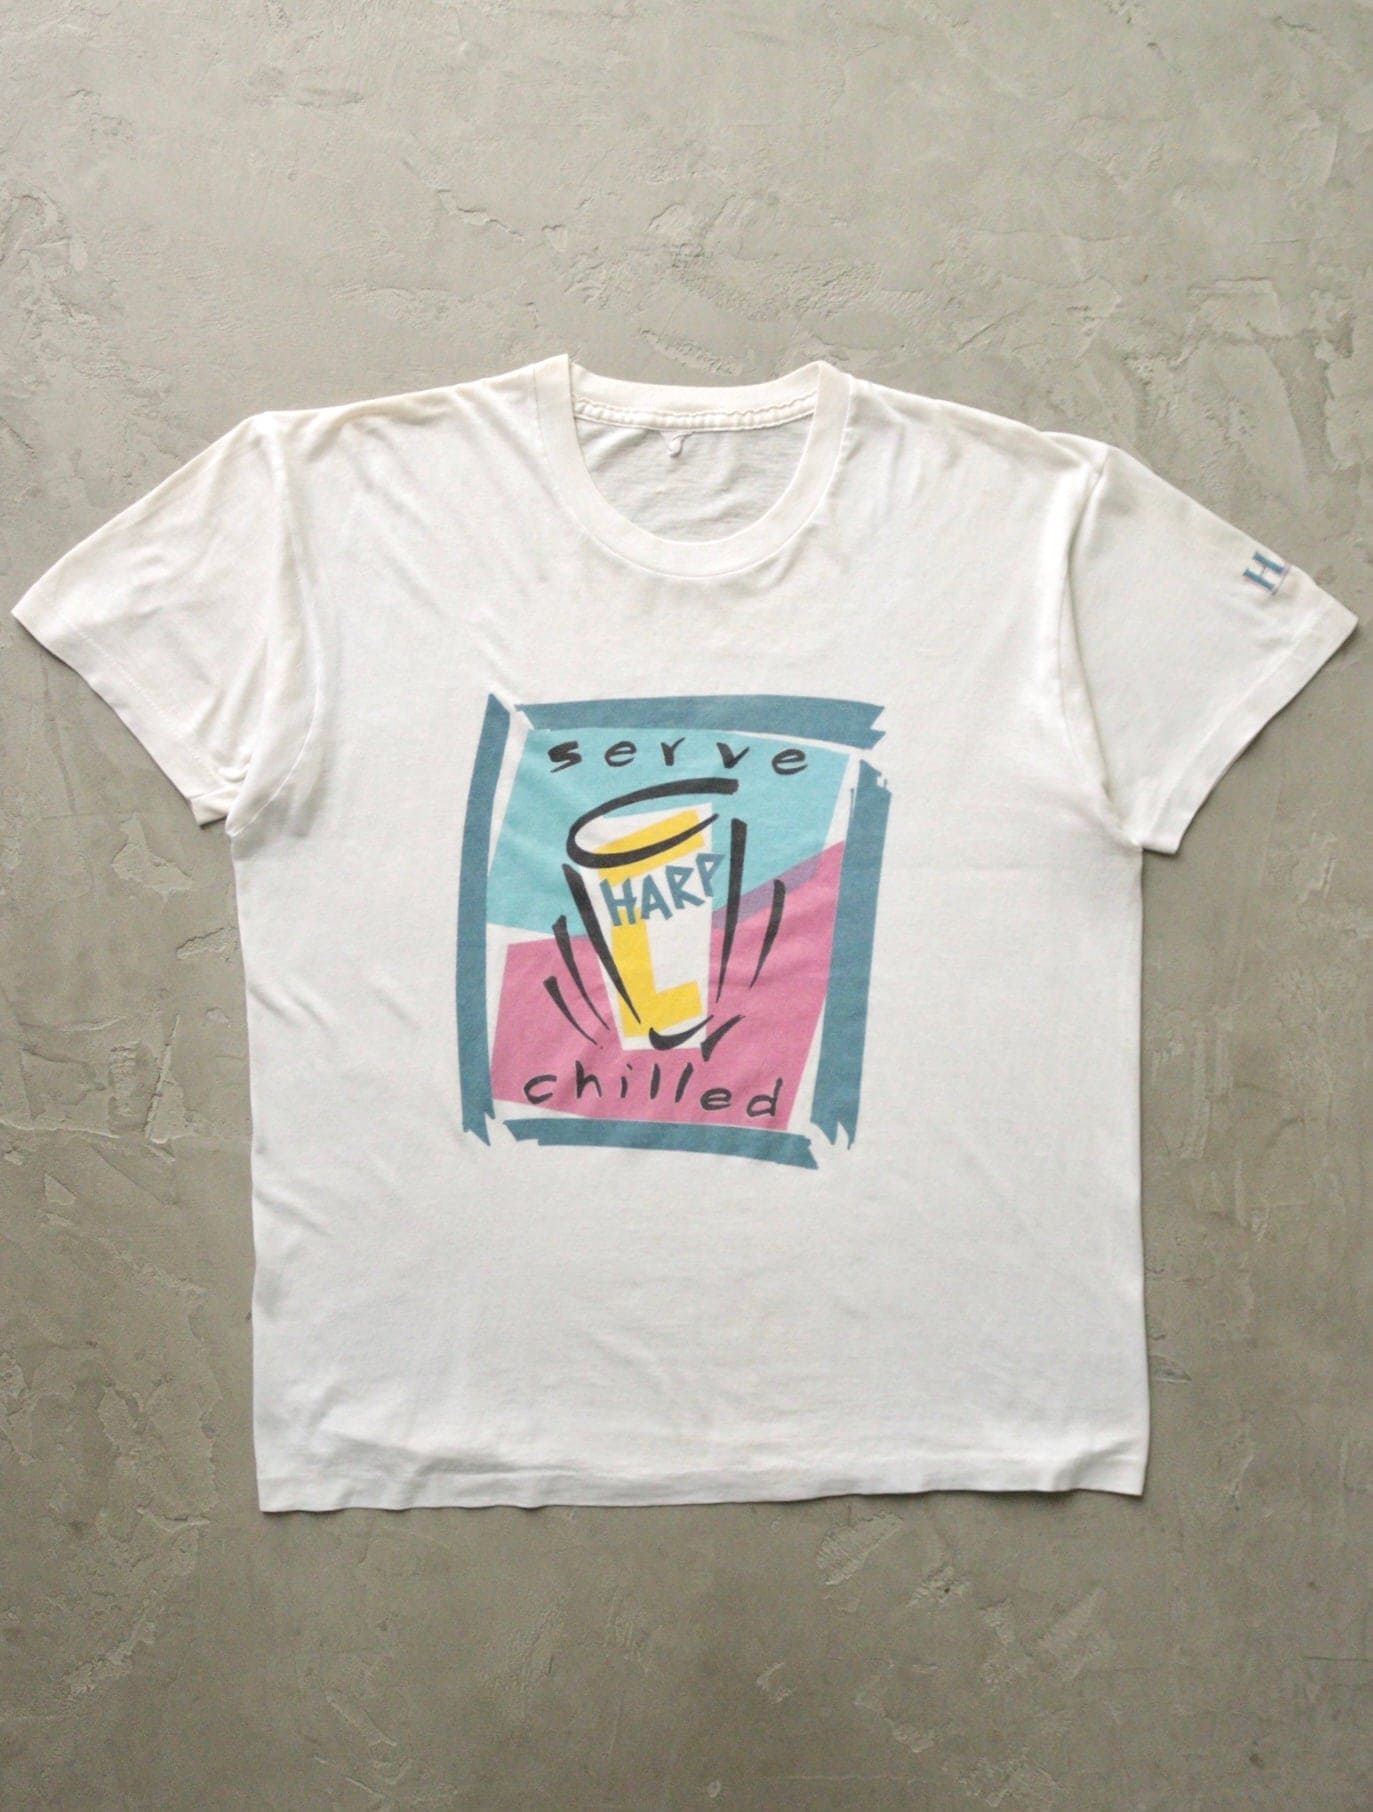 1990S SERVE CHILLED TEE